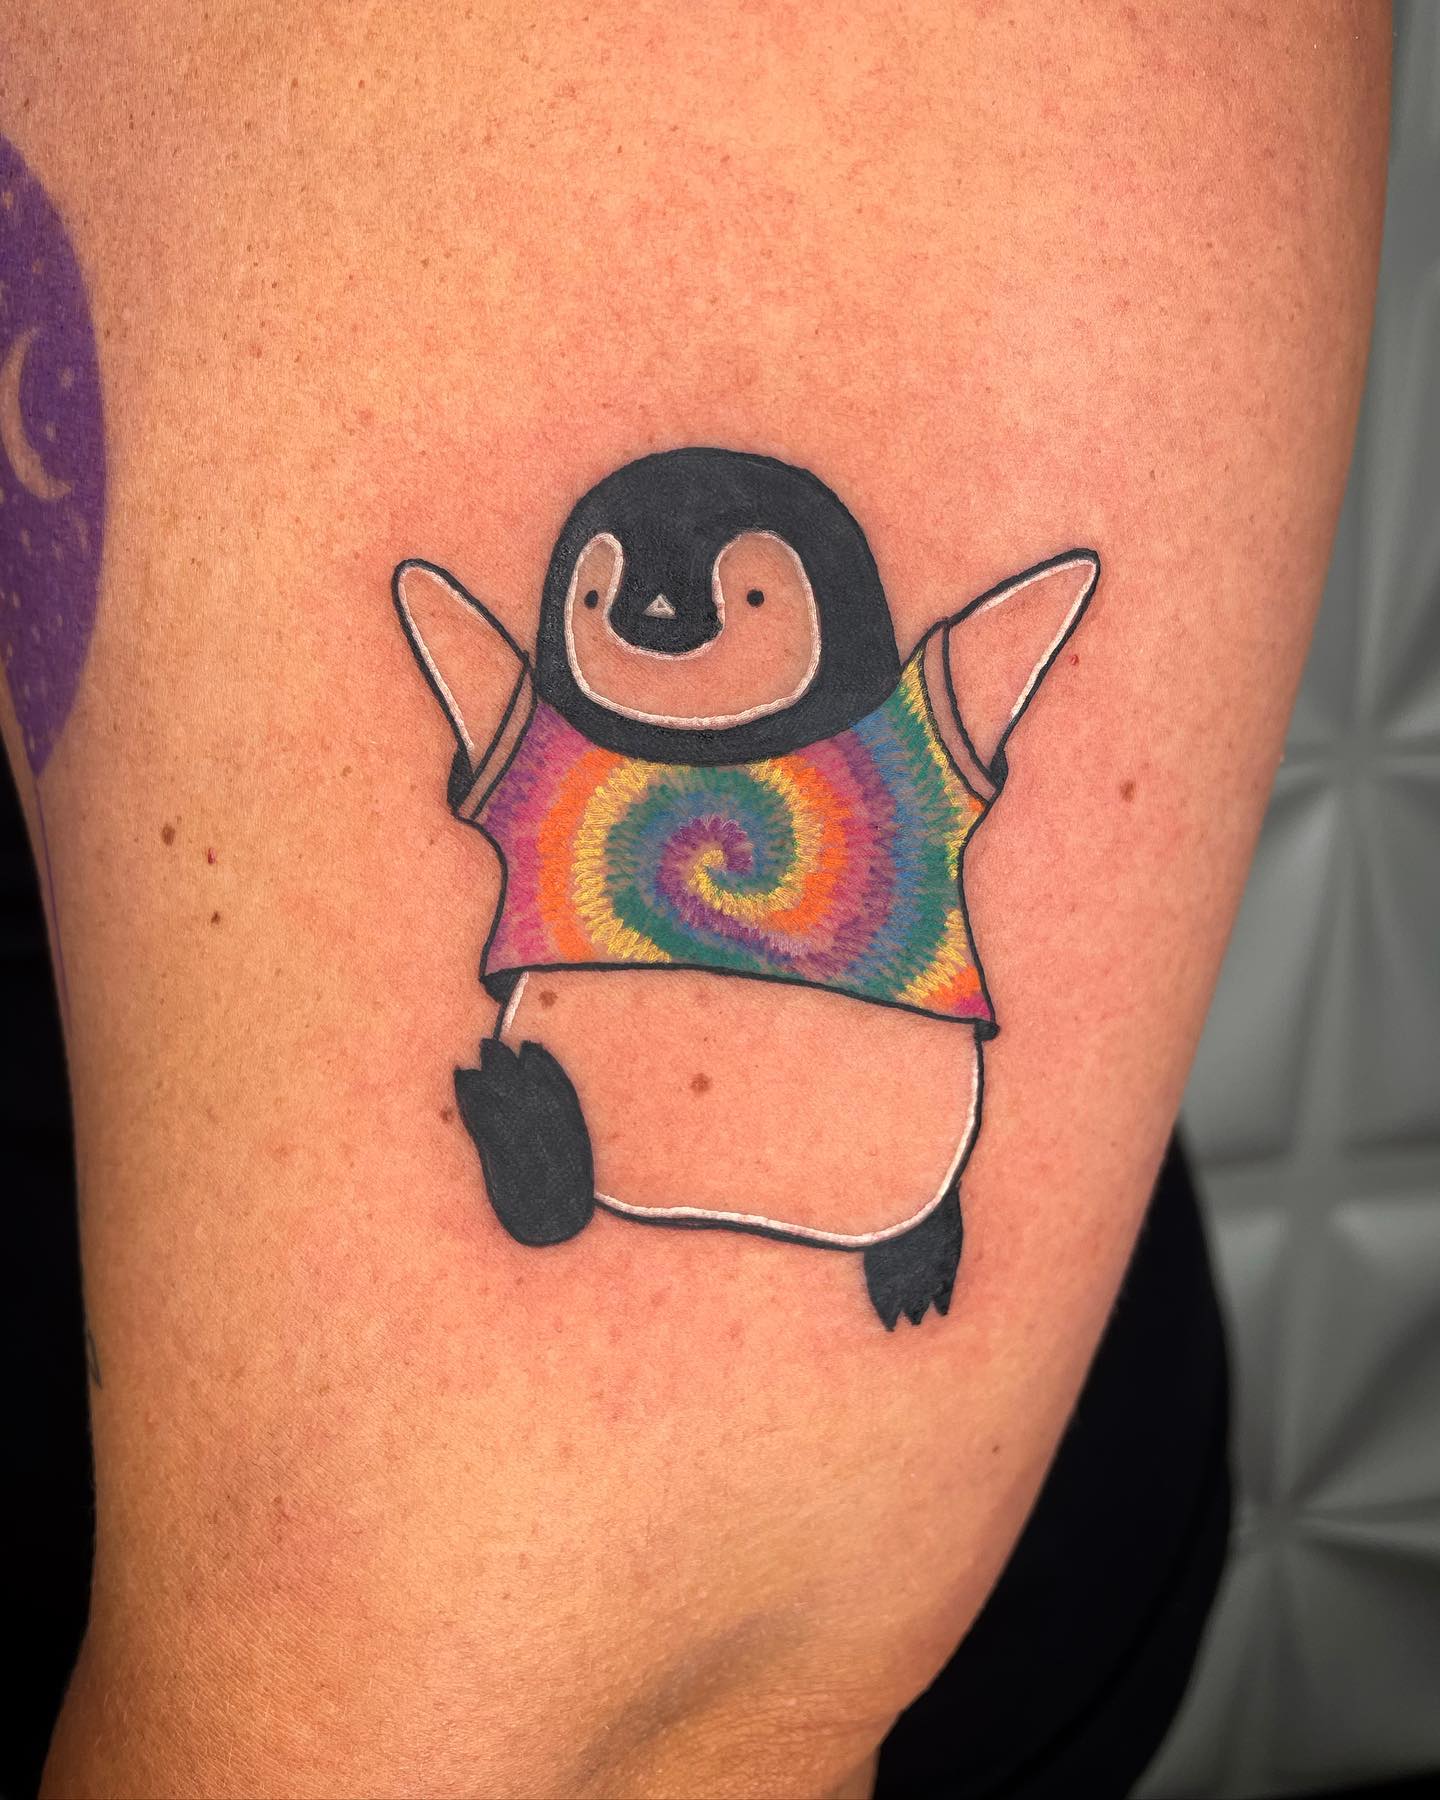 A penguin wearing a batik T-shirt sound weird but you know, there is no limit for imagination. Go for this fun and creative tattoo.